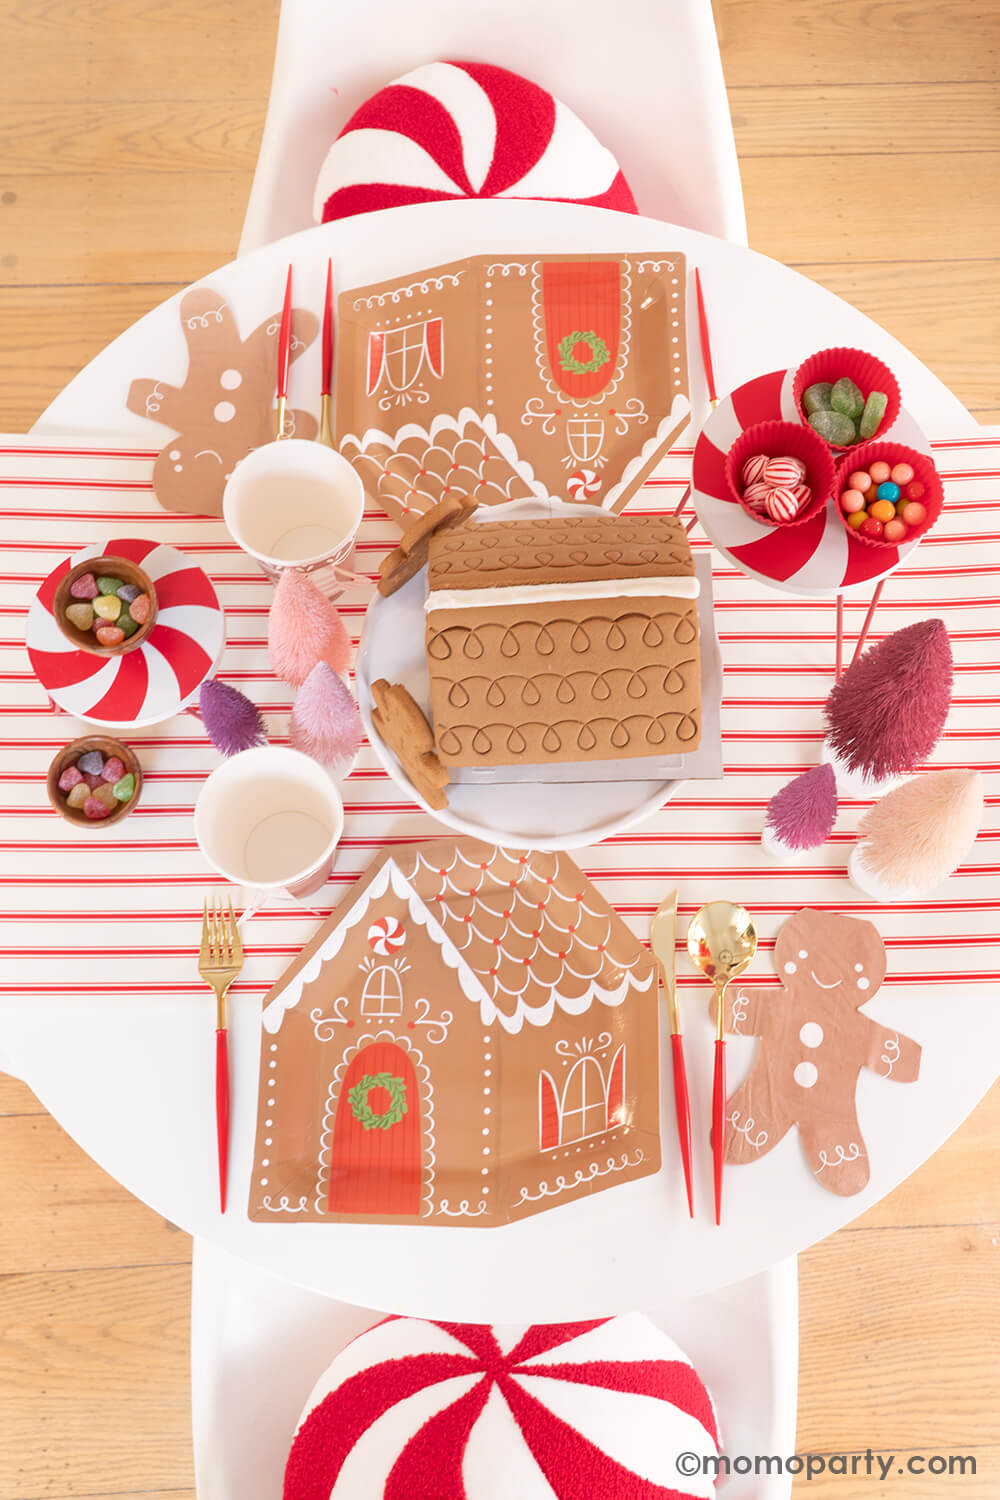 Top view of Momo Party's Gingerbread House Decoration Home Party: A dining table adorned with My Mind's Eye Gingerbread House-Shaped Plates, Smiley Gingerbread Man Napkins, Gold and Red Cutlery Sets, and Gingerbread House Paper Party Cups with Handles. A pre-built Gingerbread House sits in the center, ready for decorating, surrounded by Christmas Bottle Brush Trees and candies—all atop the festive Believe Christmas Red Striped Table Runner. What a delightful way to celebrate the holiday with kids at home!